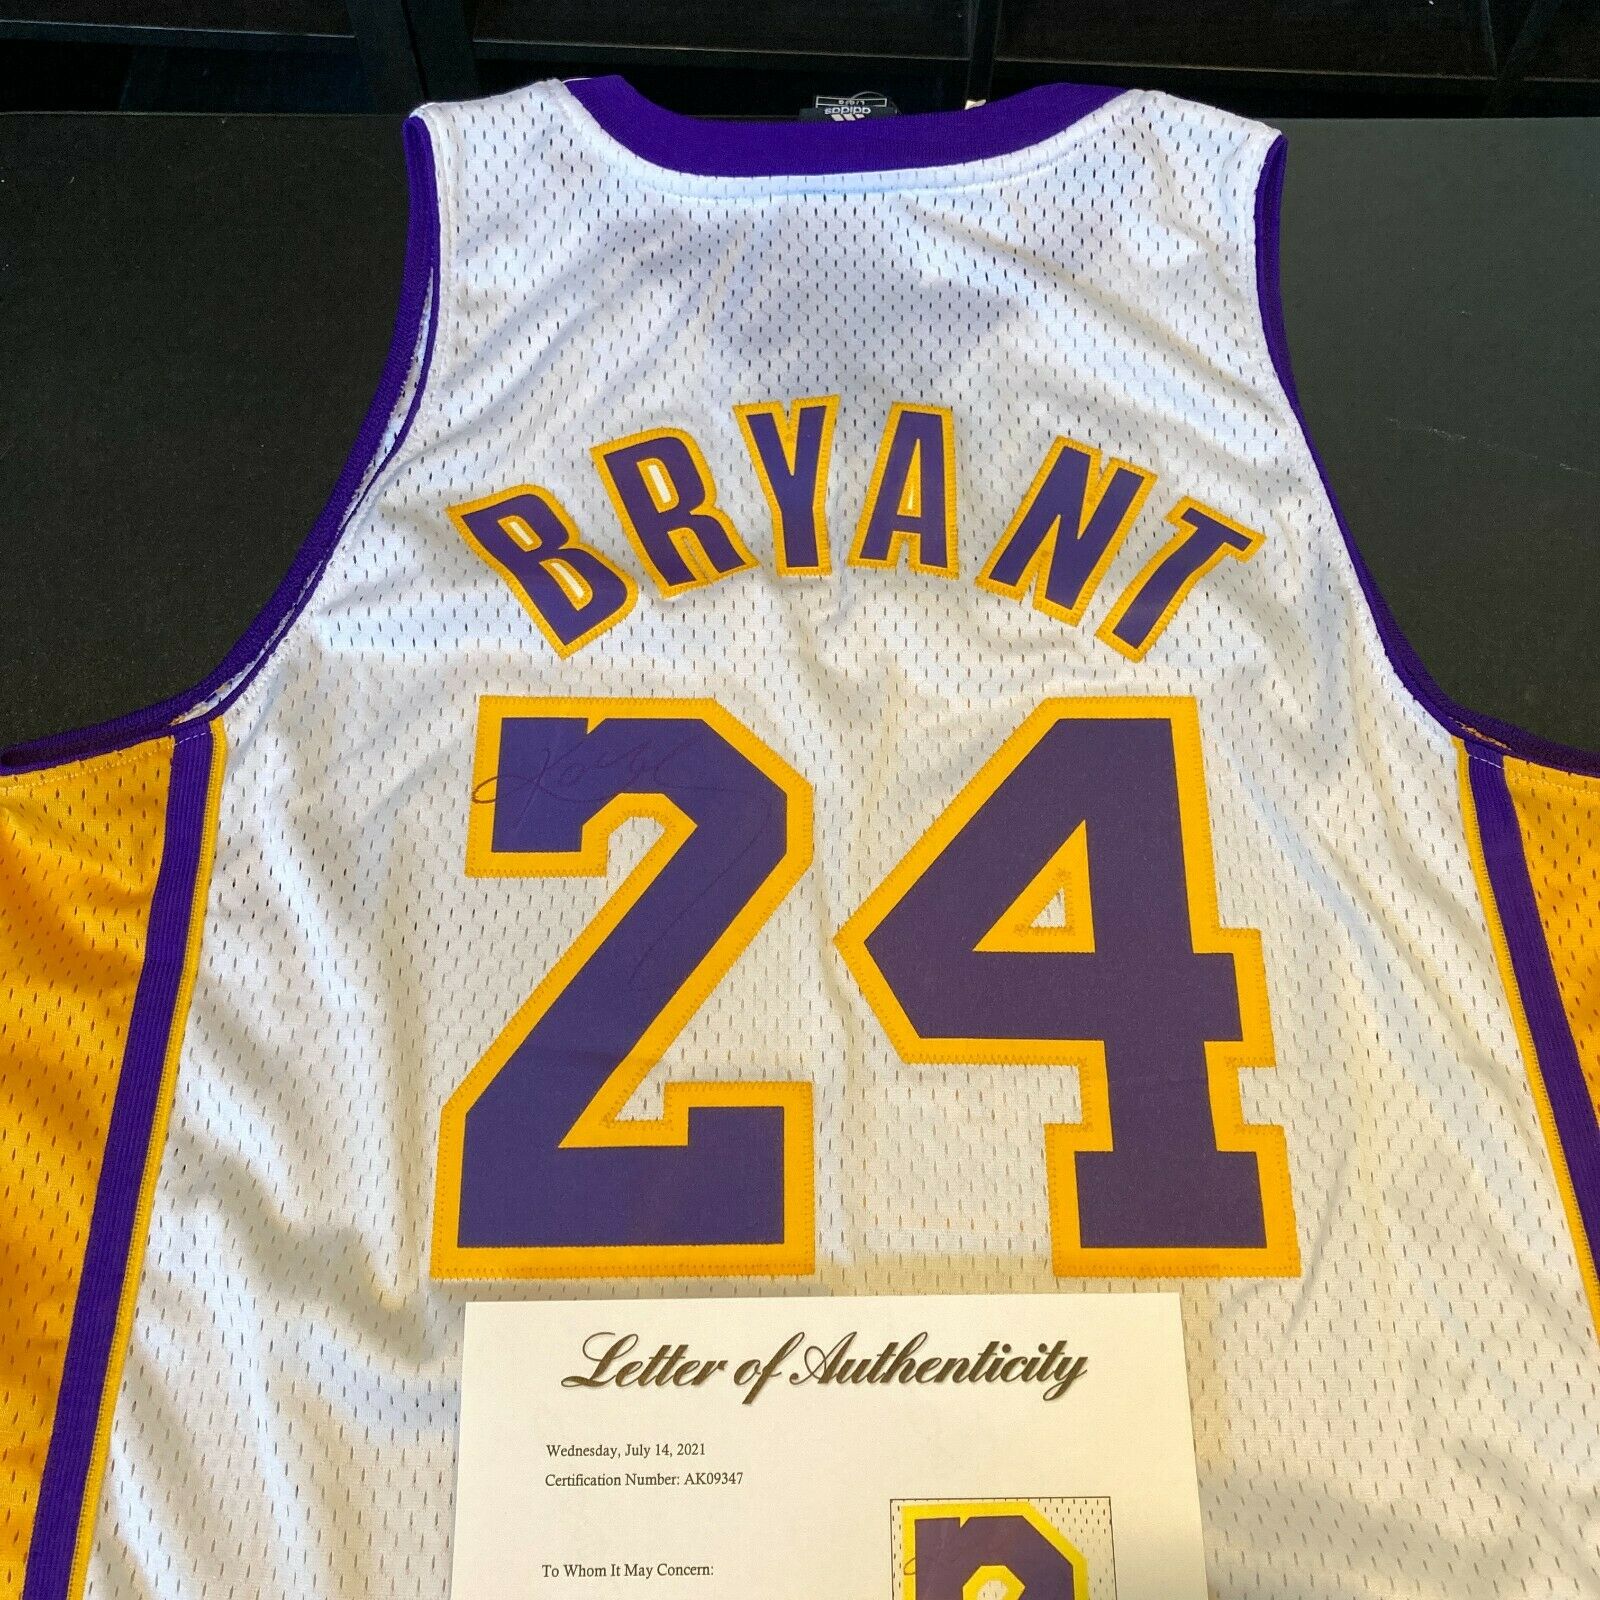 authentic kobe bryant jersey signed